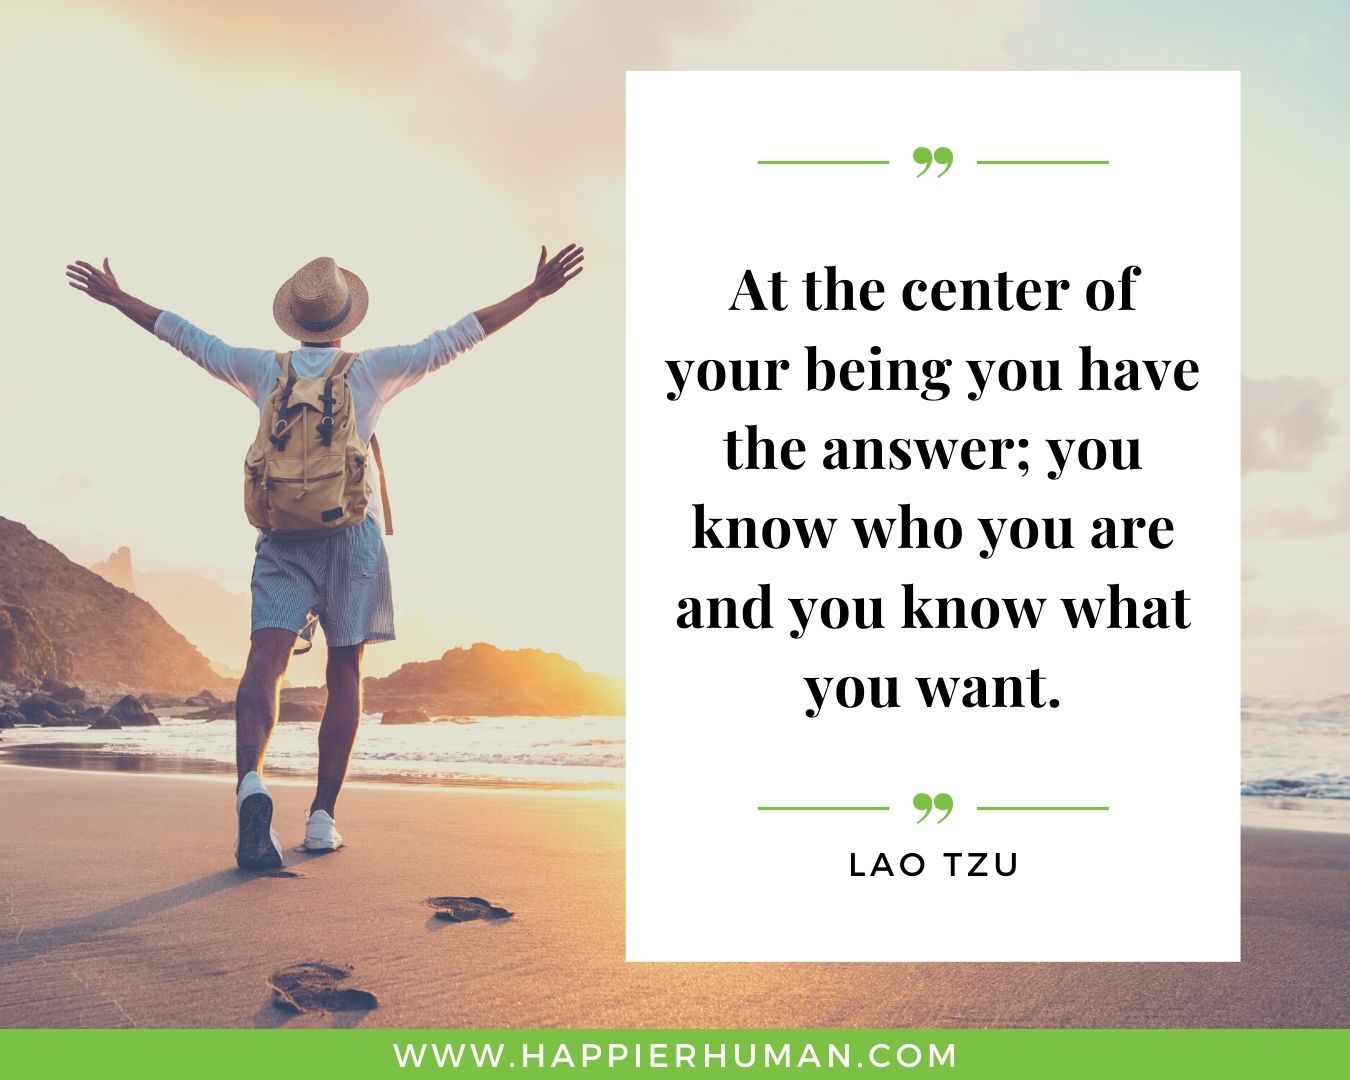 Positive Energy Quotes - “At the center of your being you have the answer; you know who you are and you know what you want.” - Lao Tzu